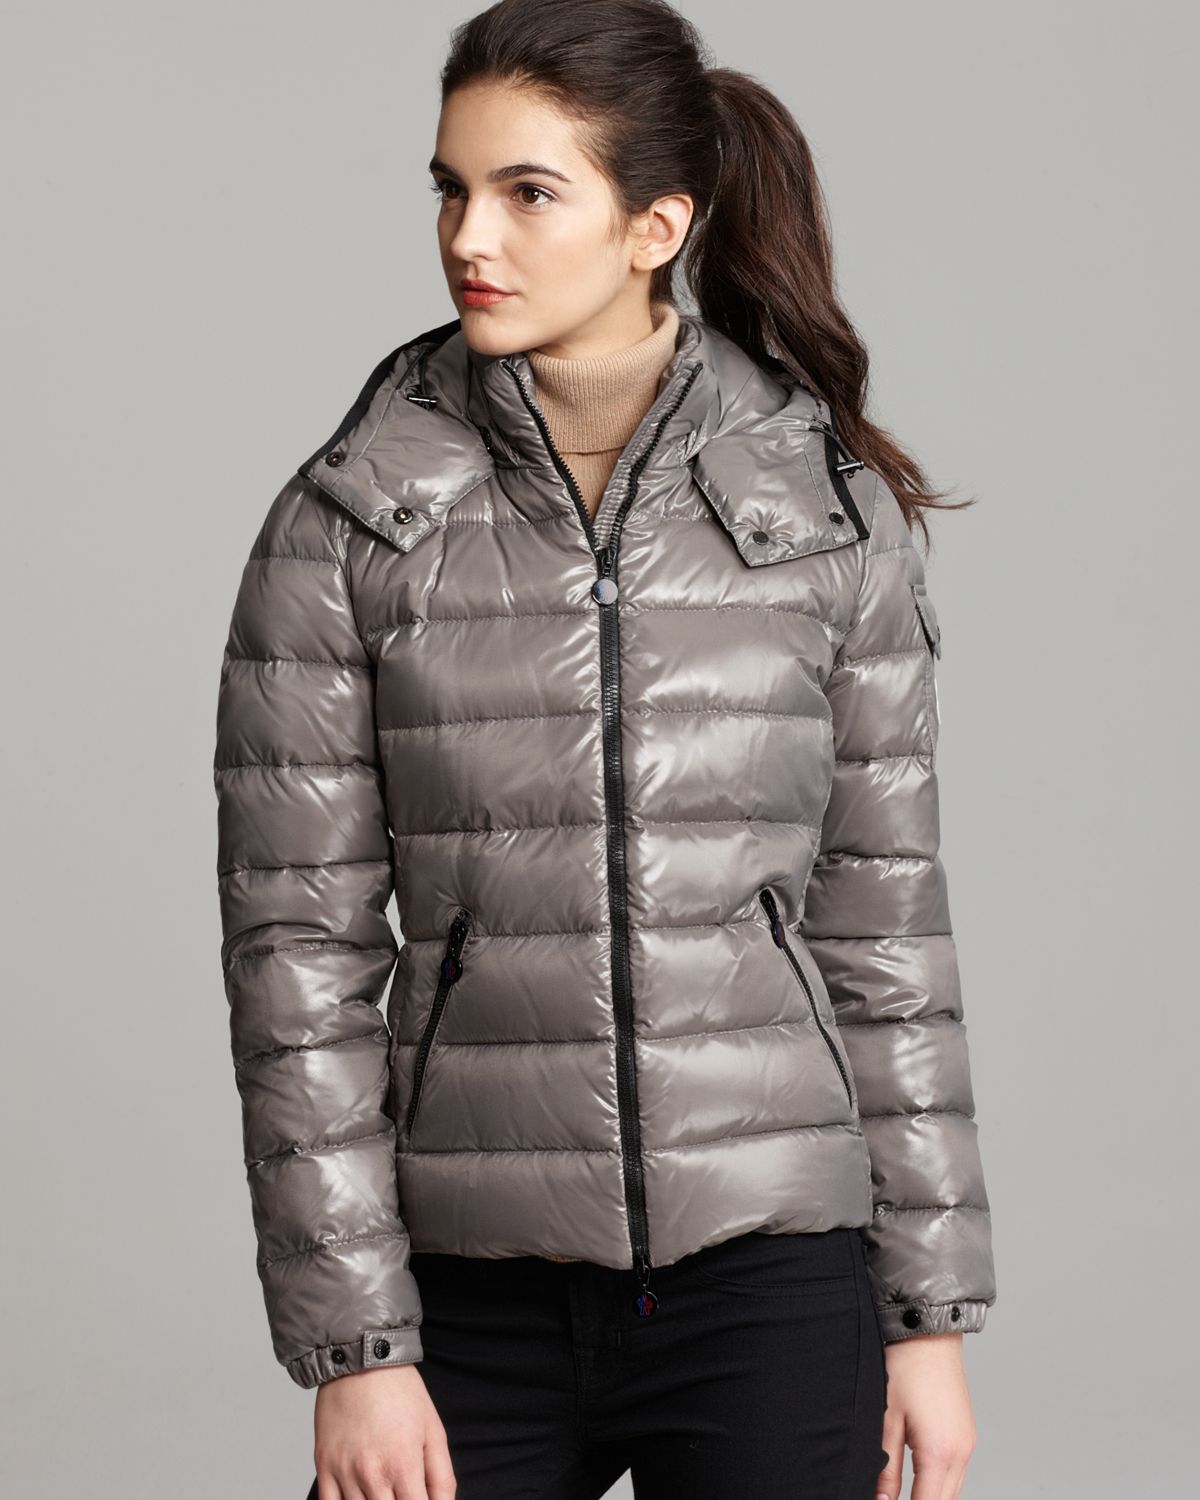 Lyst - Moncler Bady Lacquer Hooded Short Down Coat in Gray